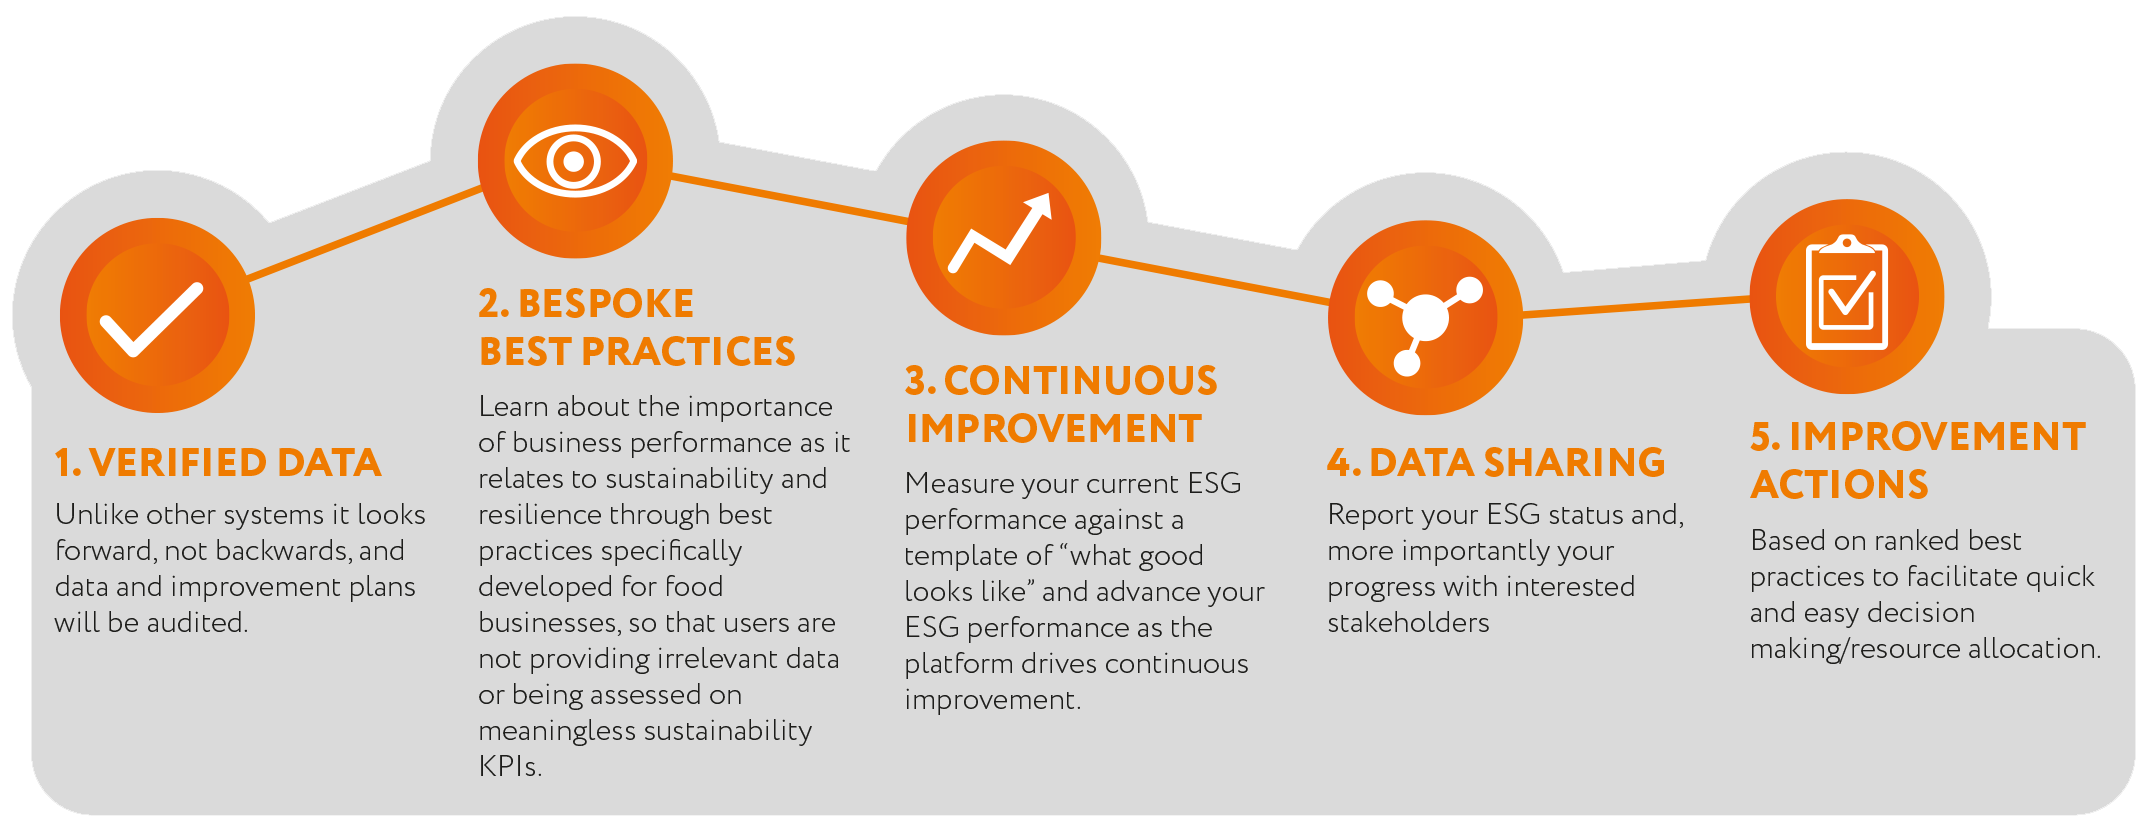 1. Verified data; 2. Bespoke best practices; 3. Continuous improvement; 4. Data sharing; 5. Improvement actions